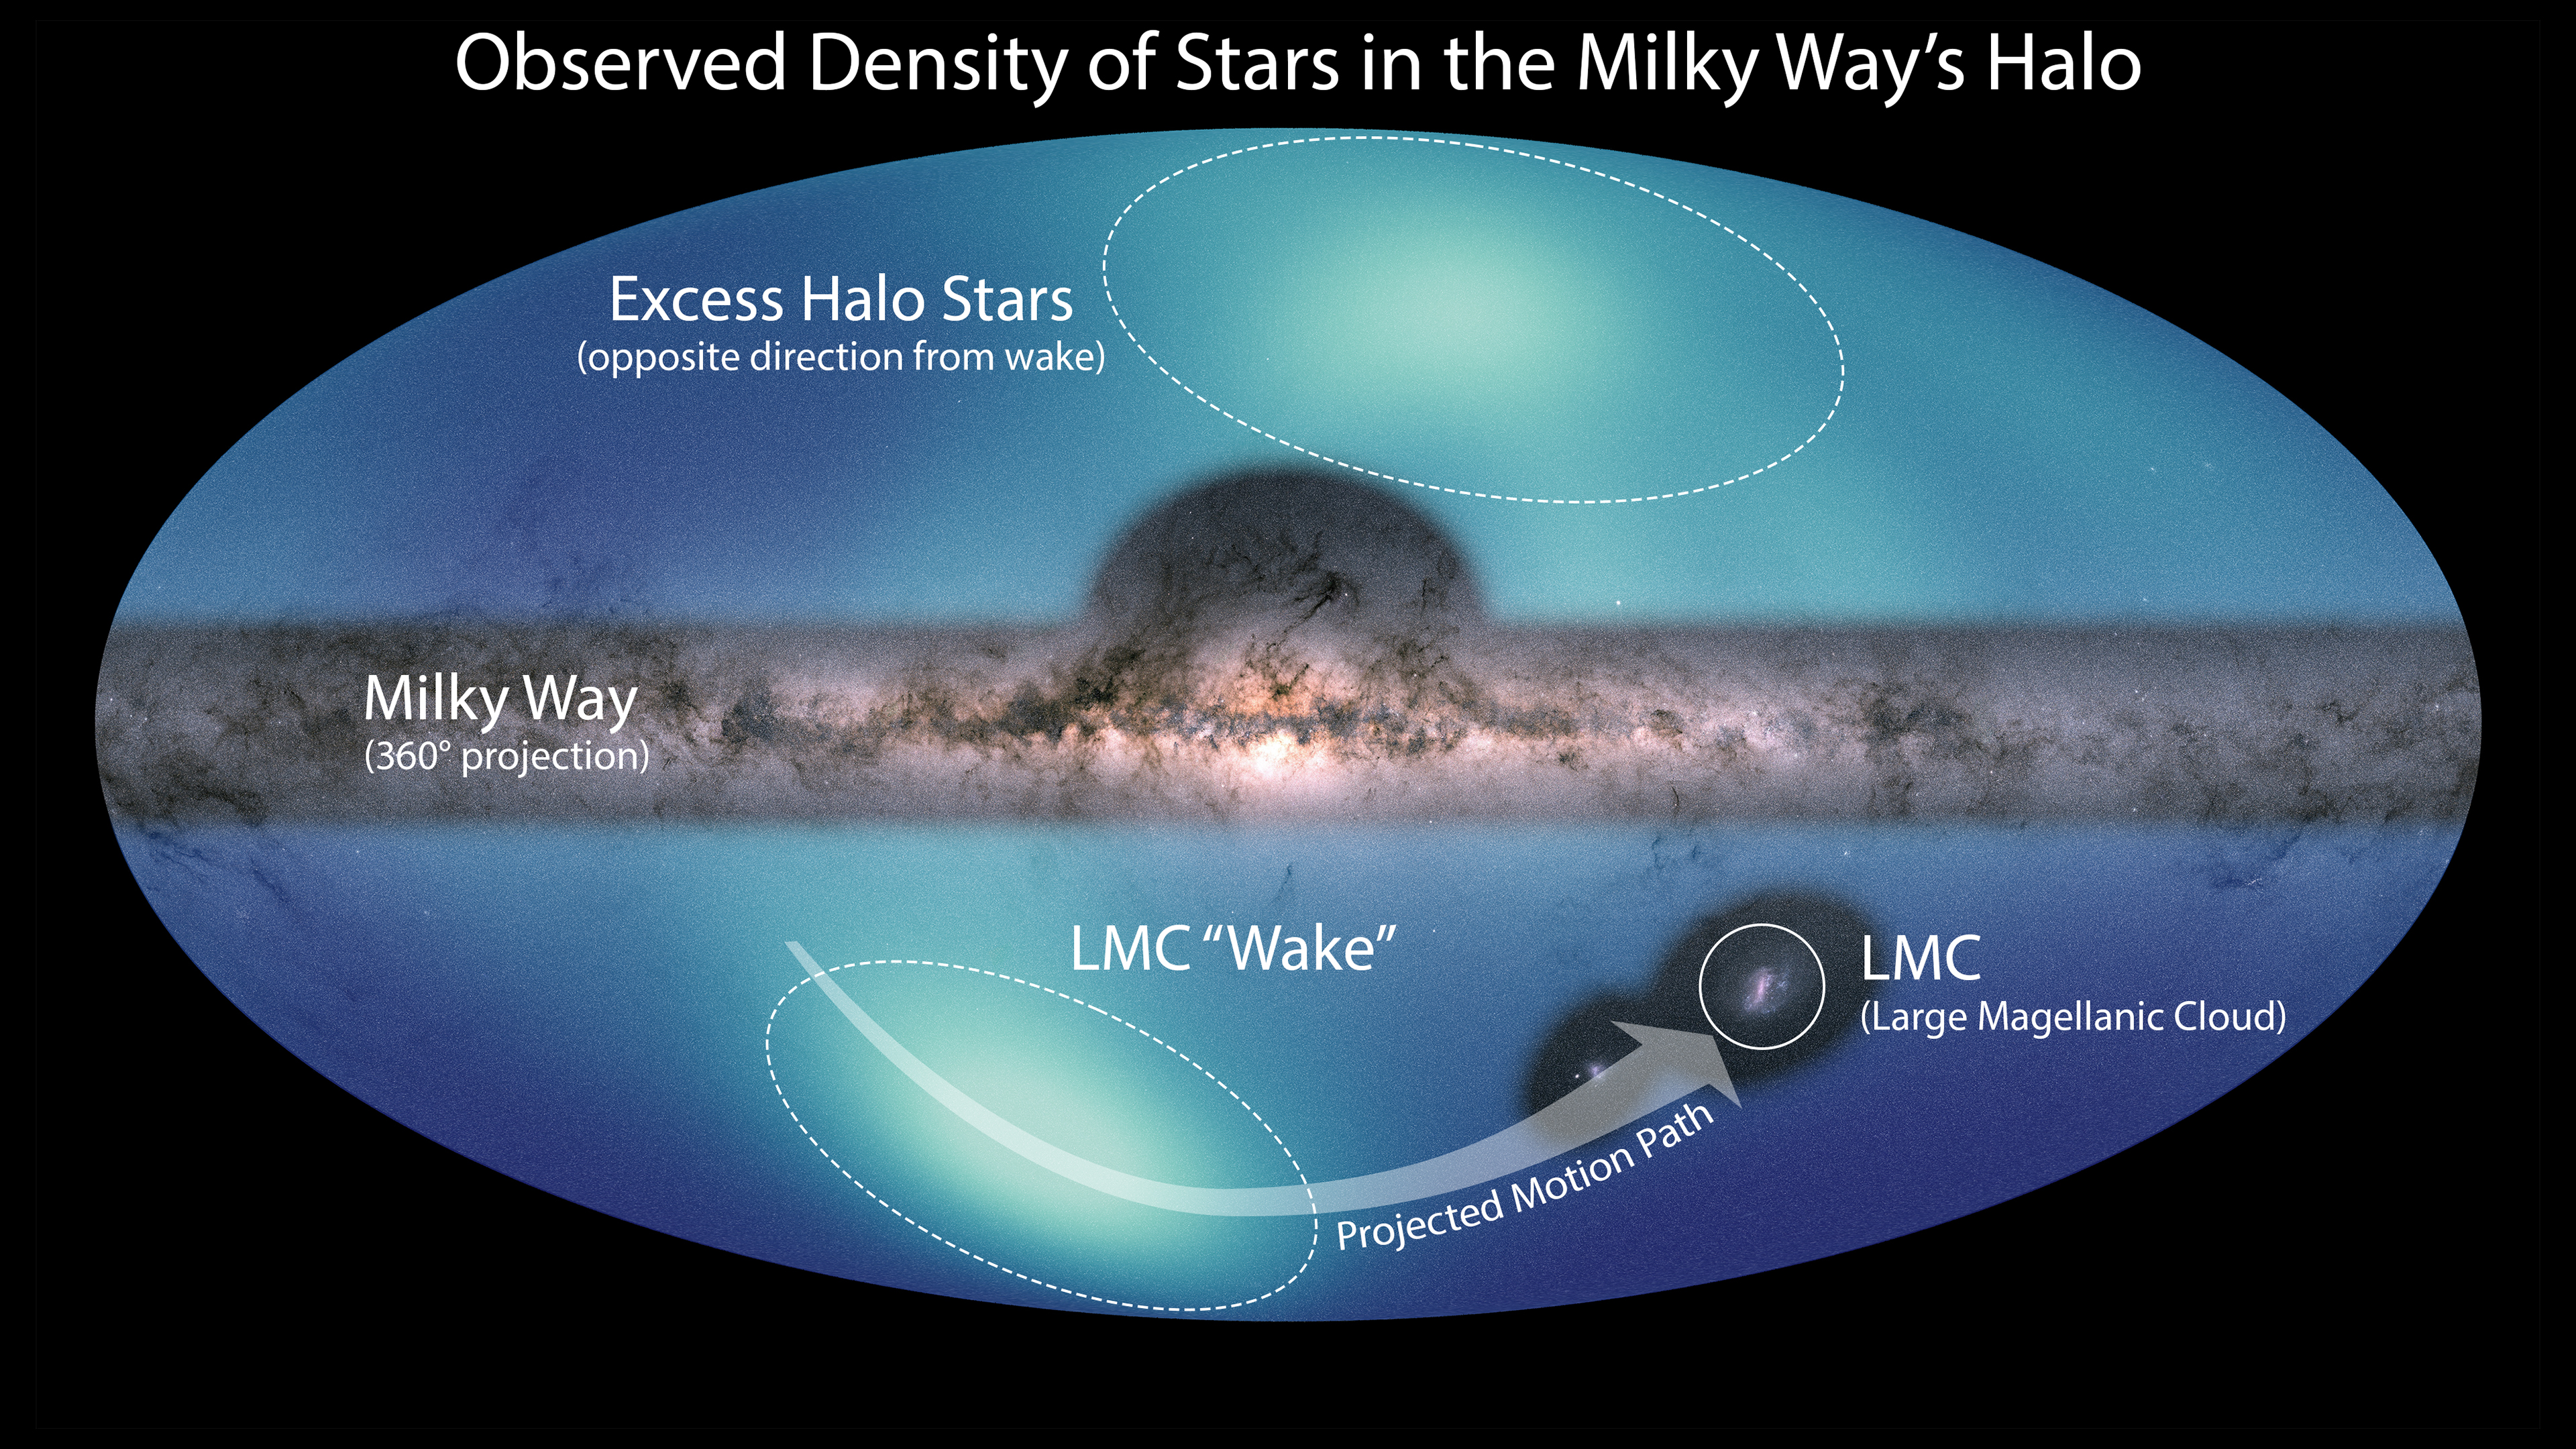 Images of the Milky Way and the Large Magellanic Cloud (LMC) are overlaid on a map of the surrounding galactic halo. The smaller structure is a wake created by the LMC's motion through this region. The larger light-blue feature corresponds to a high density of stars observed in the northern hemisphere of our galaxy. 